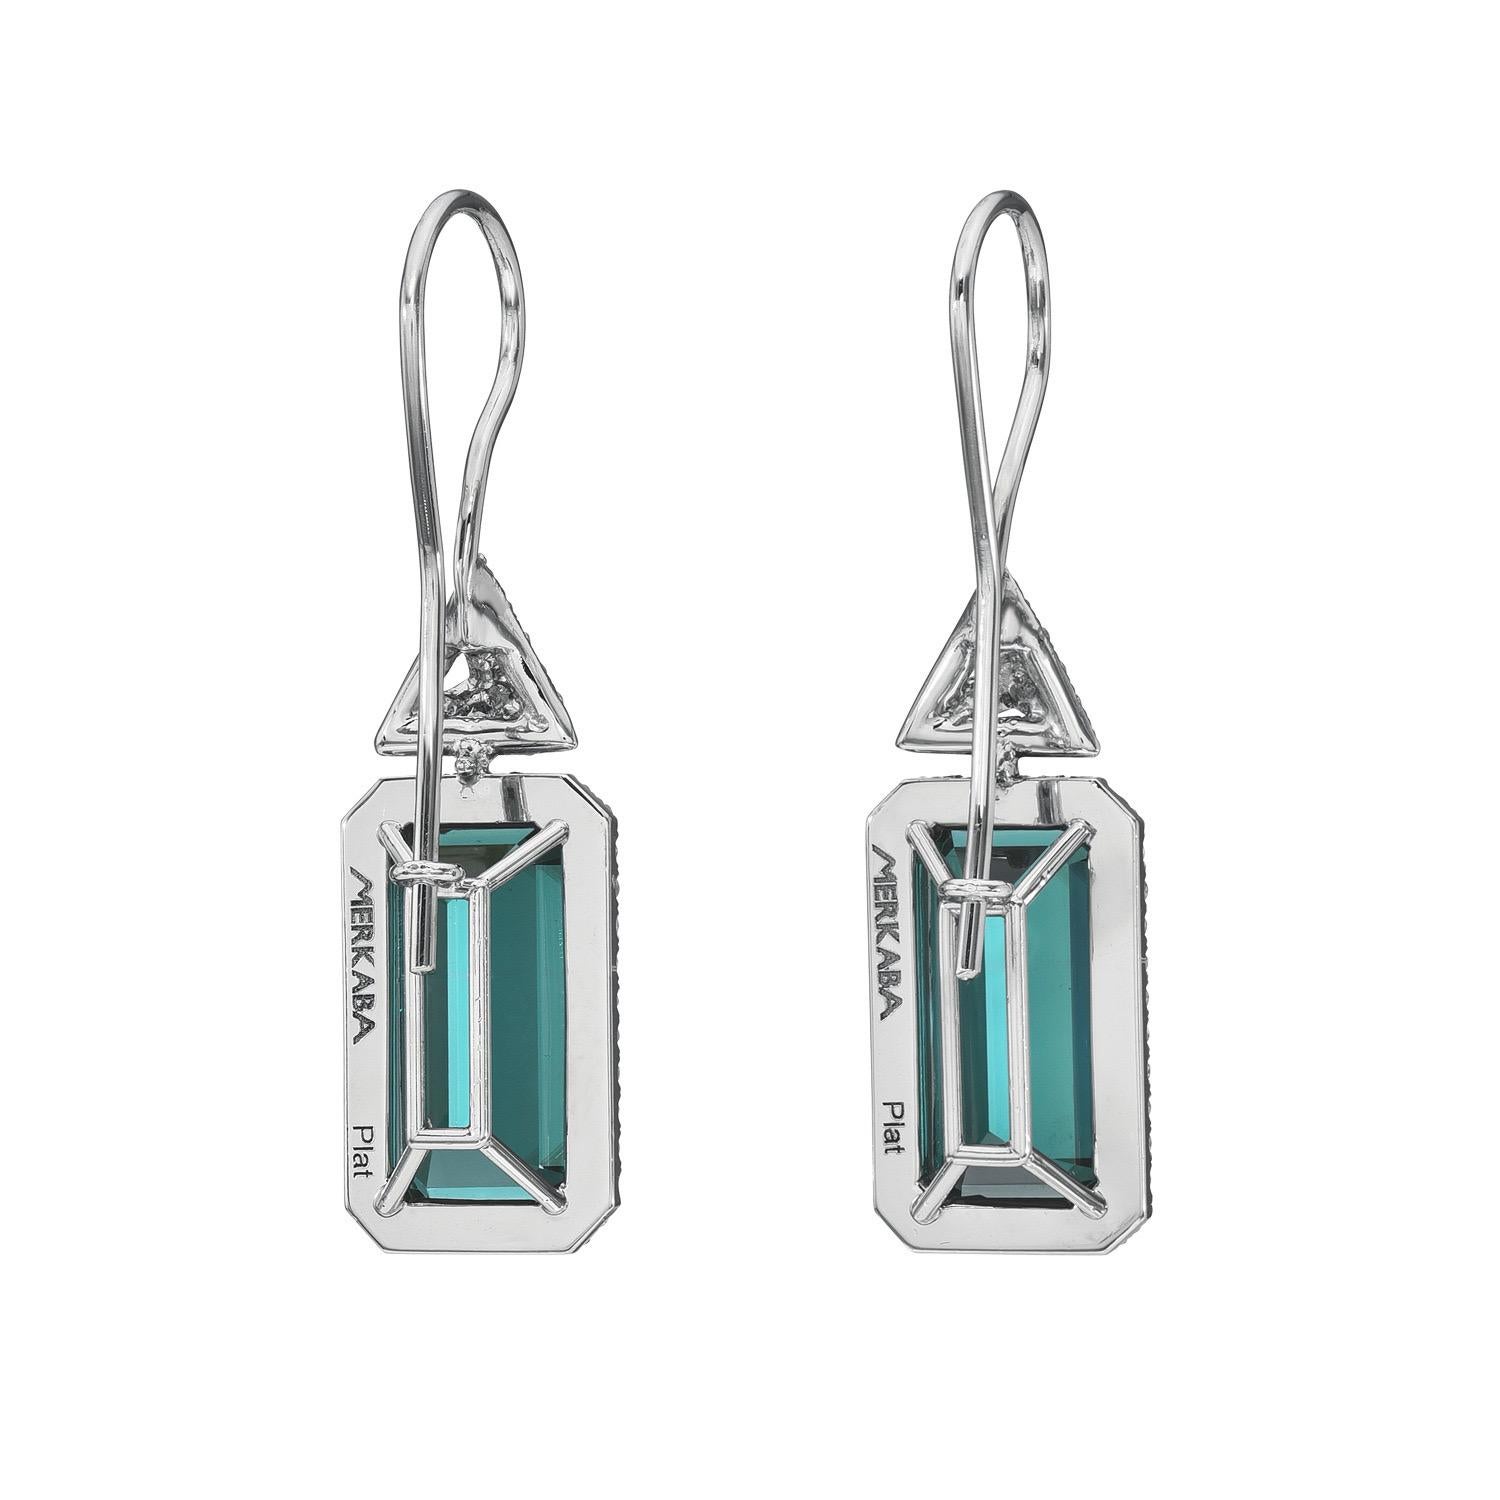 Exceptional 9.87 carat Indicolite Tourmaline emerald-cut platinum earrings, decorated with a total of 0.64 carat collection round single-cut diamonds, suspending from our signature three dimensional triangle diamond studs. Machine-cut fine